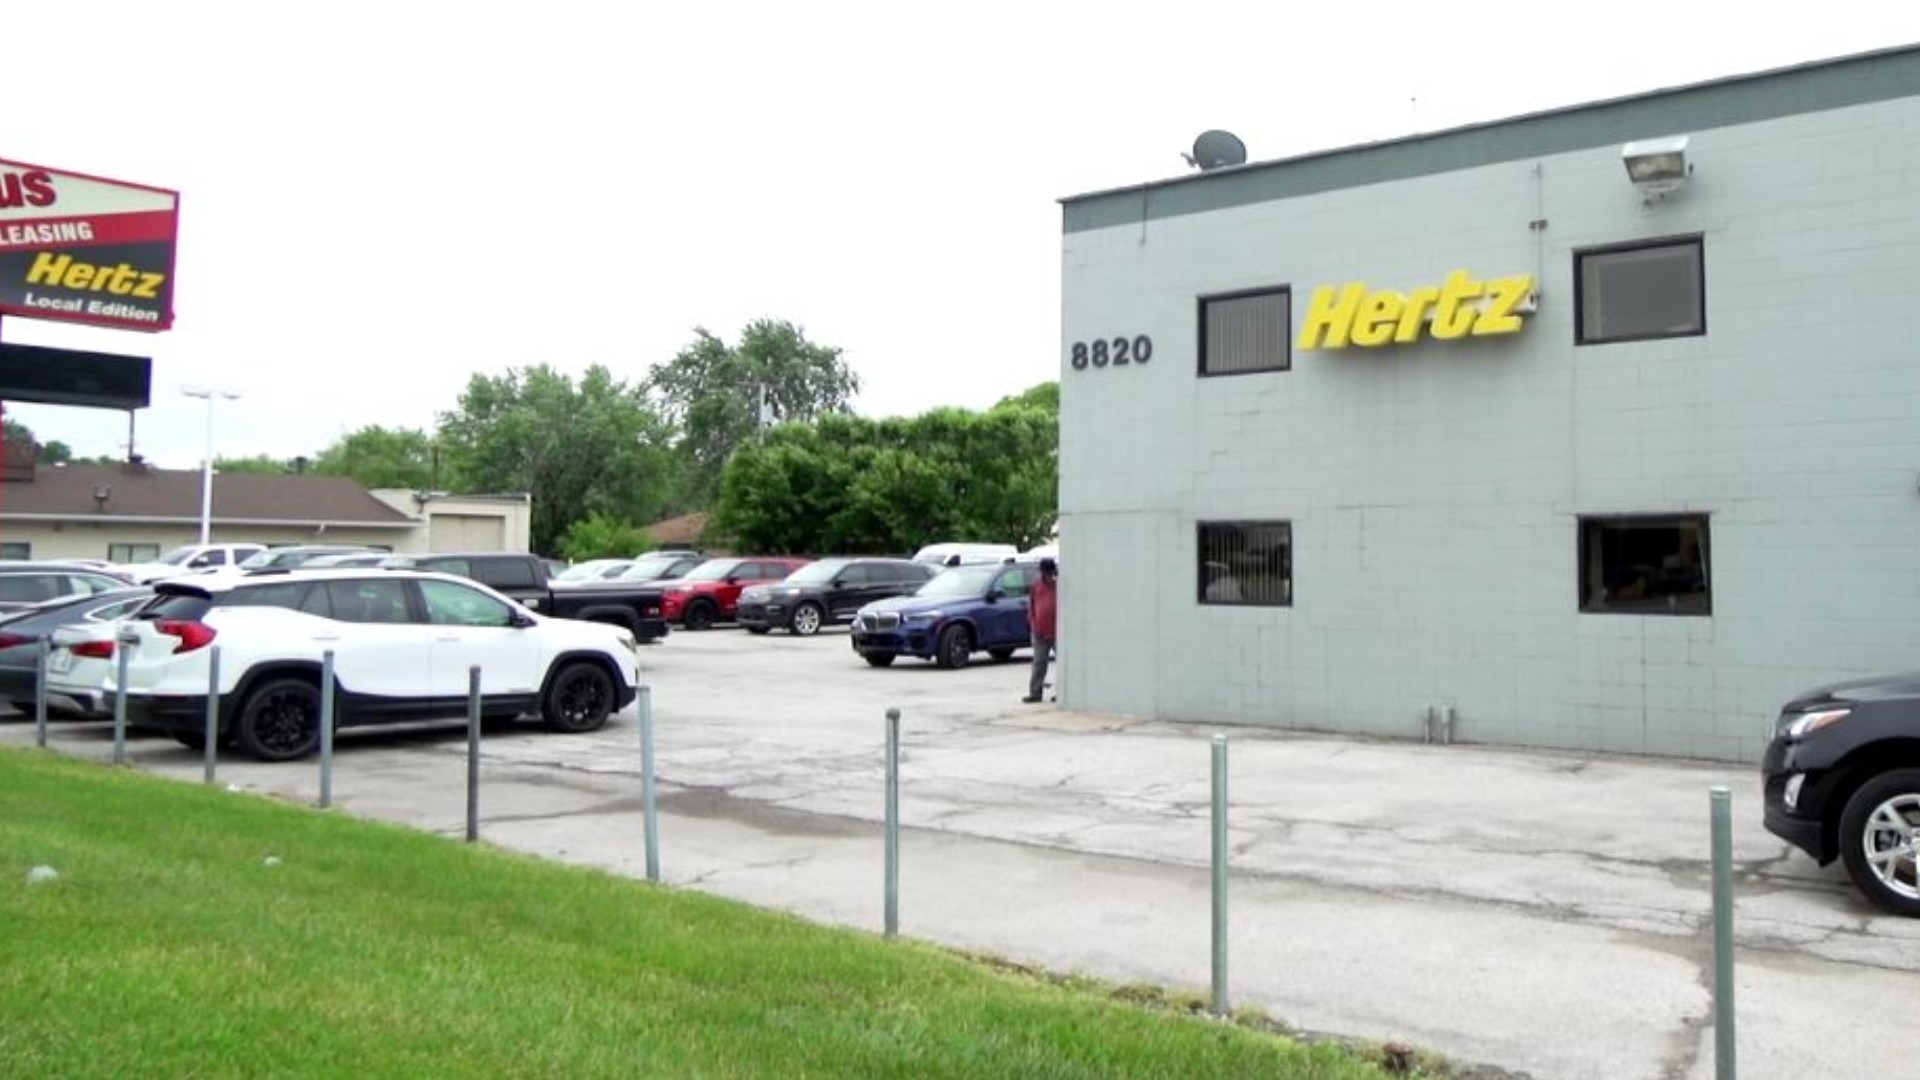 Hertz admitted it files on average 3,365 police reports every year alleging a customer stole one of its rental cars.